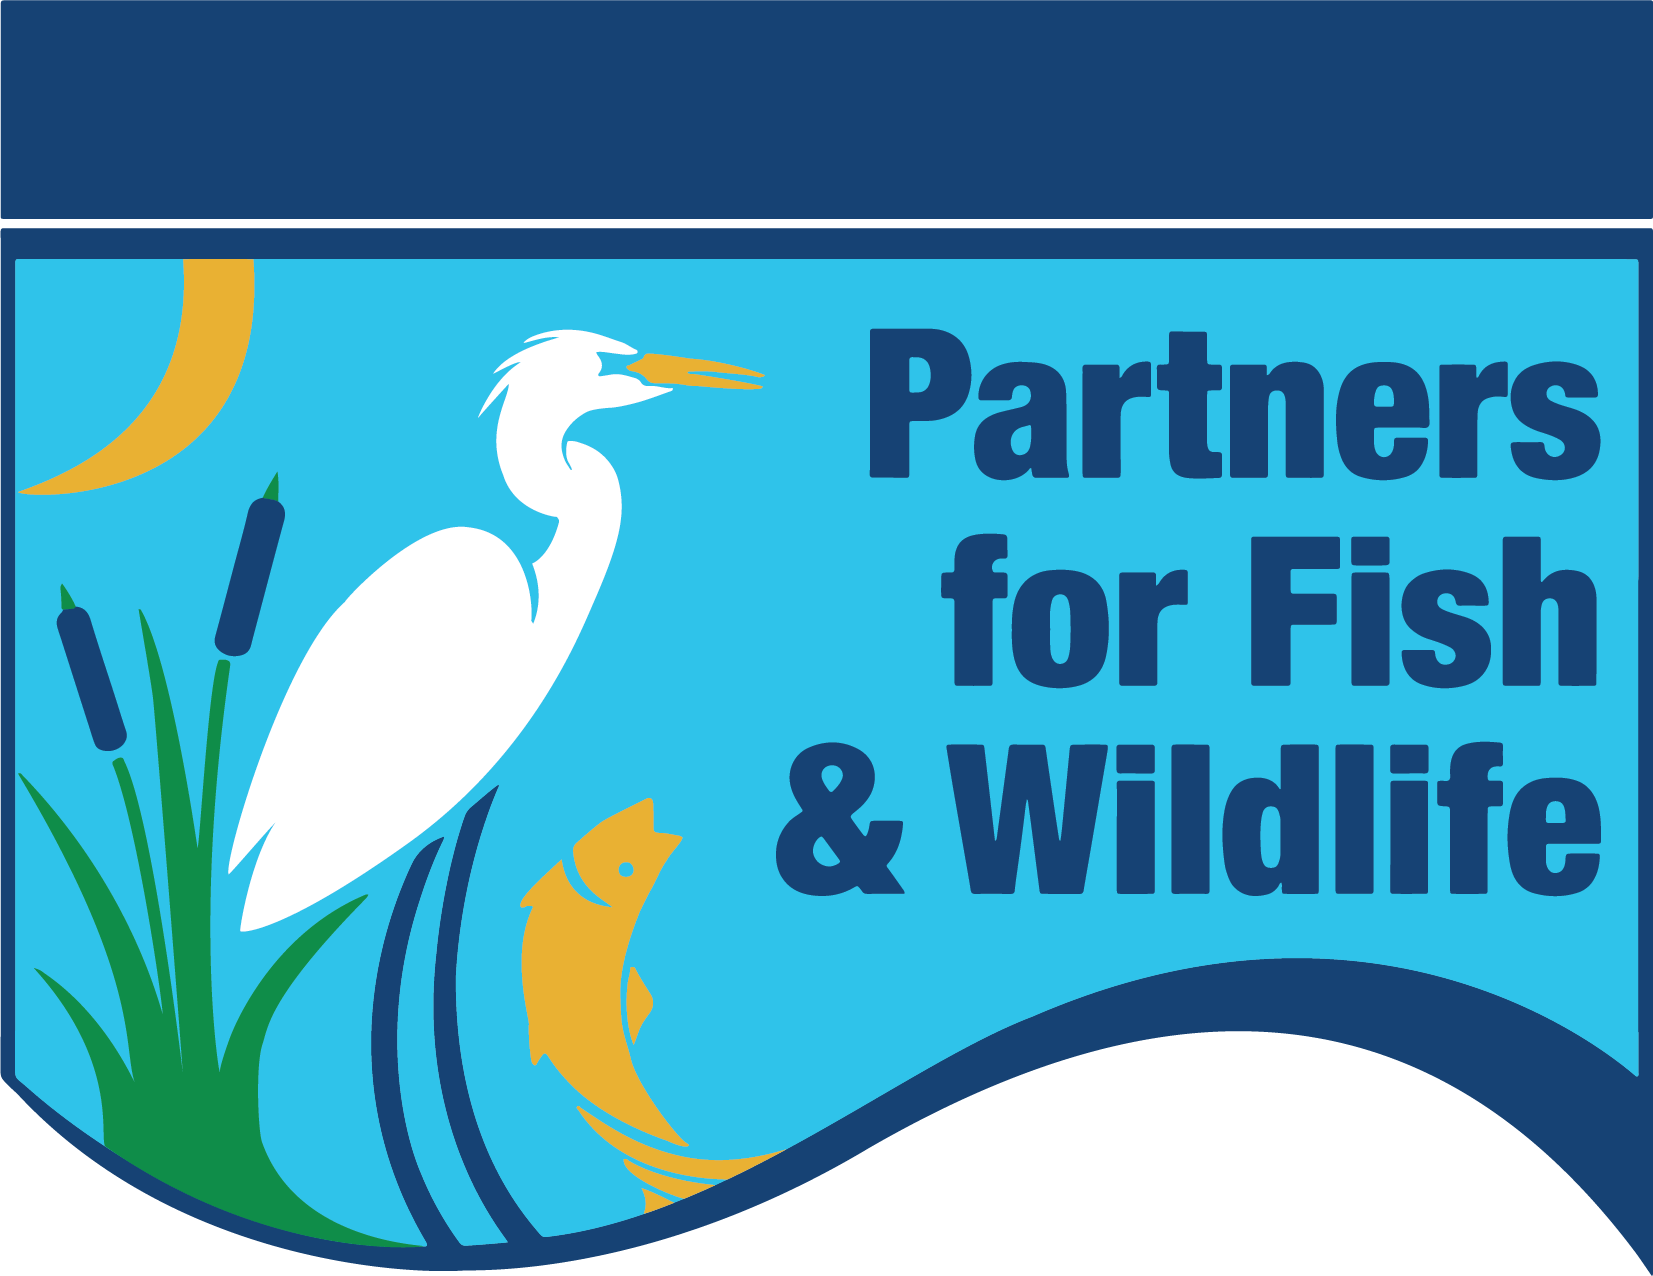 USFWS Partners for Fish and Wildlife Program logo featuring a crane and a fish in a wetland